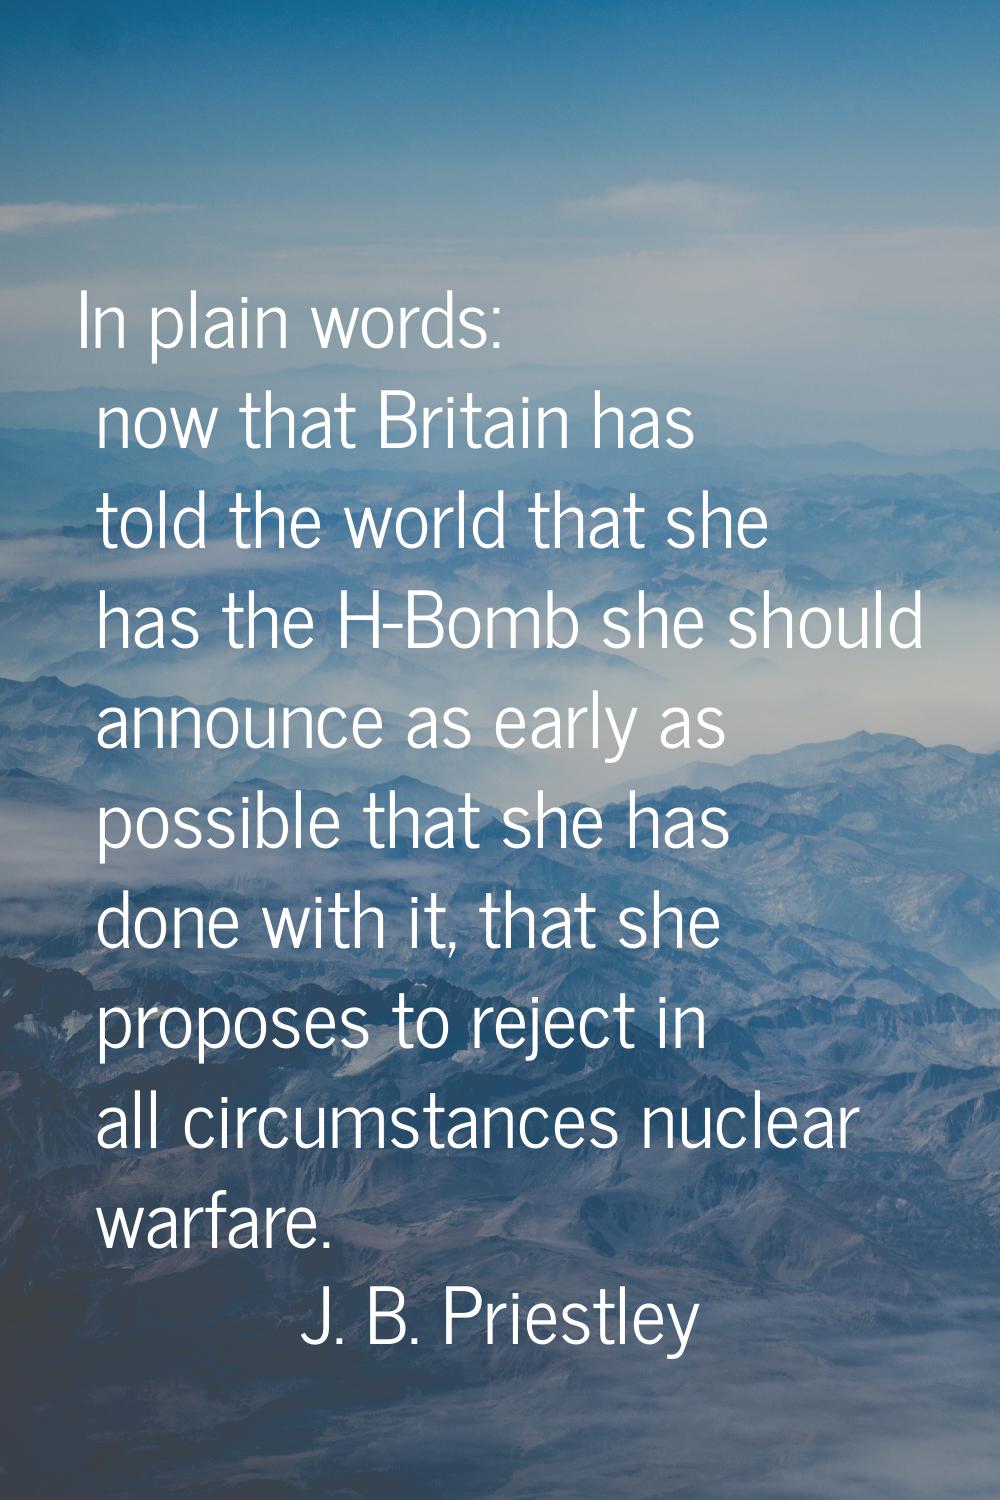 In plain words: now that Britain has told the world that she has the H-Bomb she should announce as 